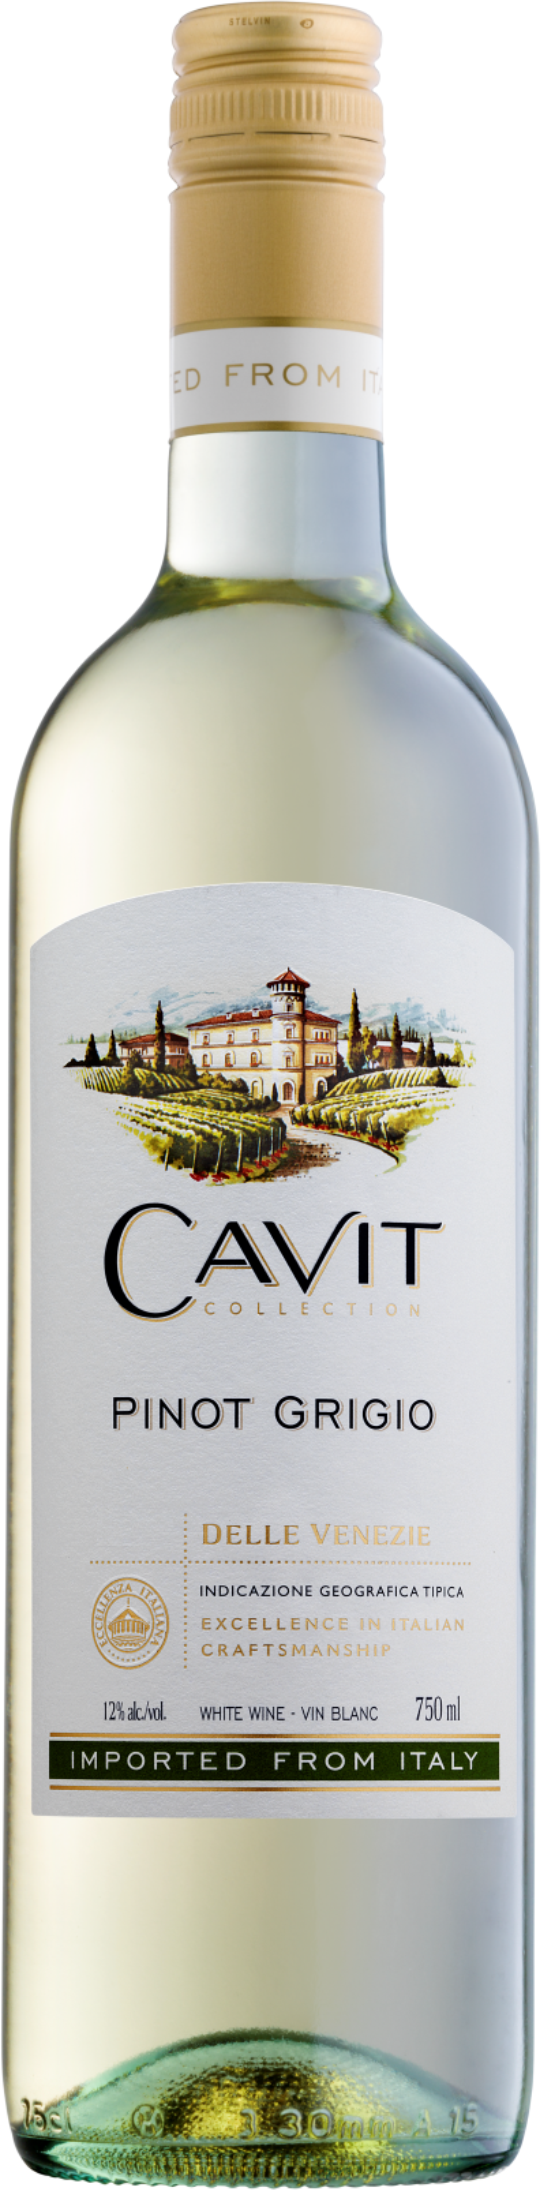 cavit-pinot-grigio-2020-expert-wine-ratings-and-wine-reviews-by-winealign